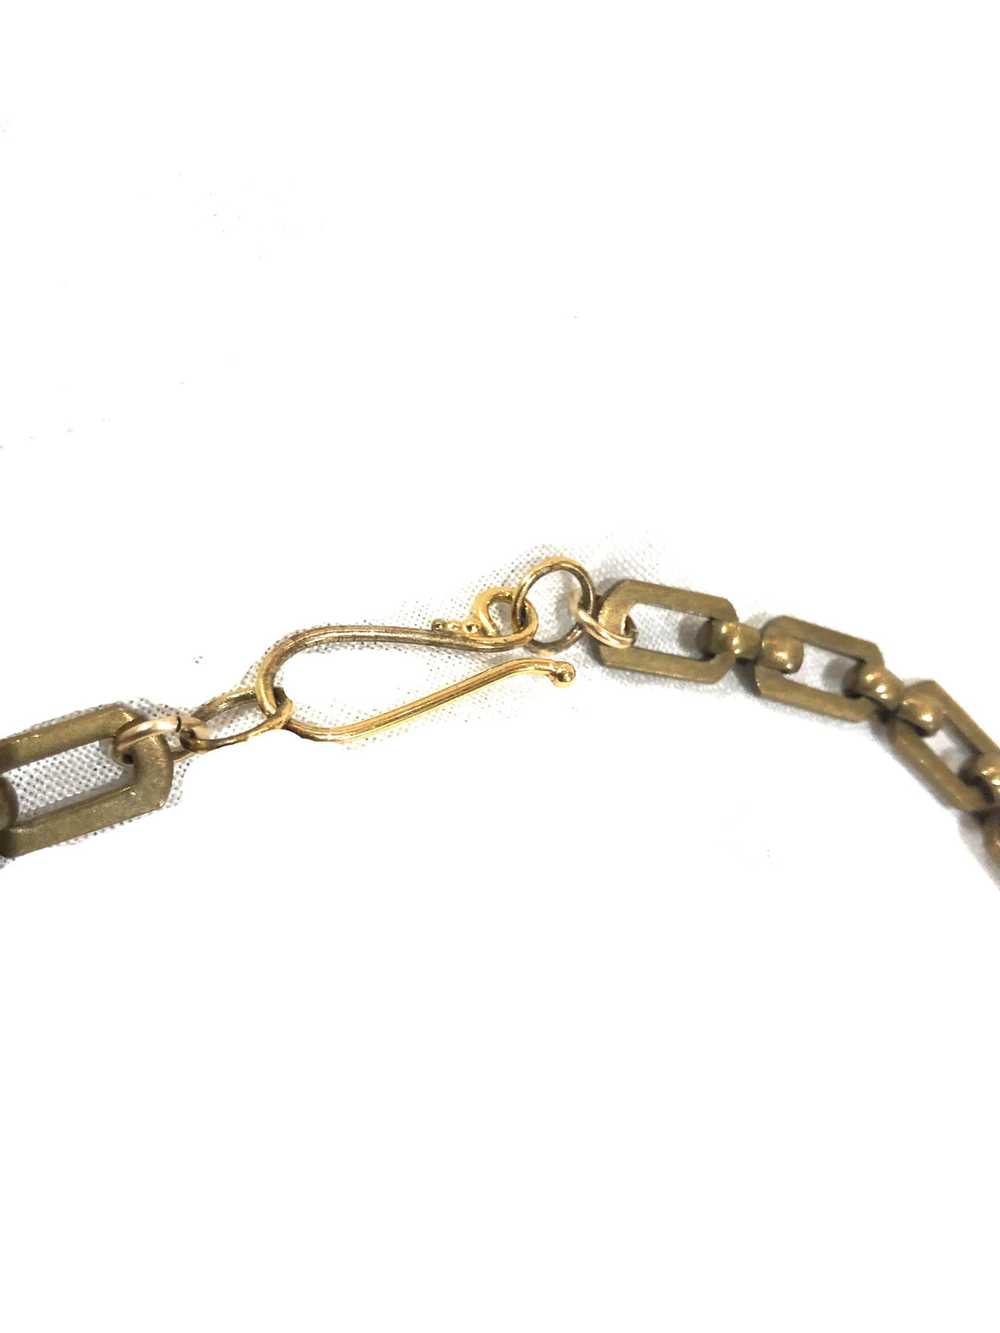 1960s/70s Brutalist Bronze and Brass Necklace - image 4